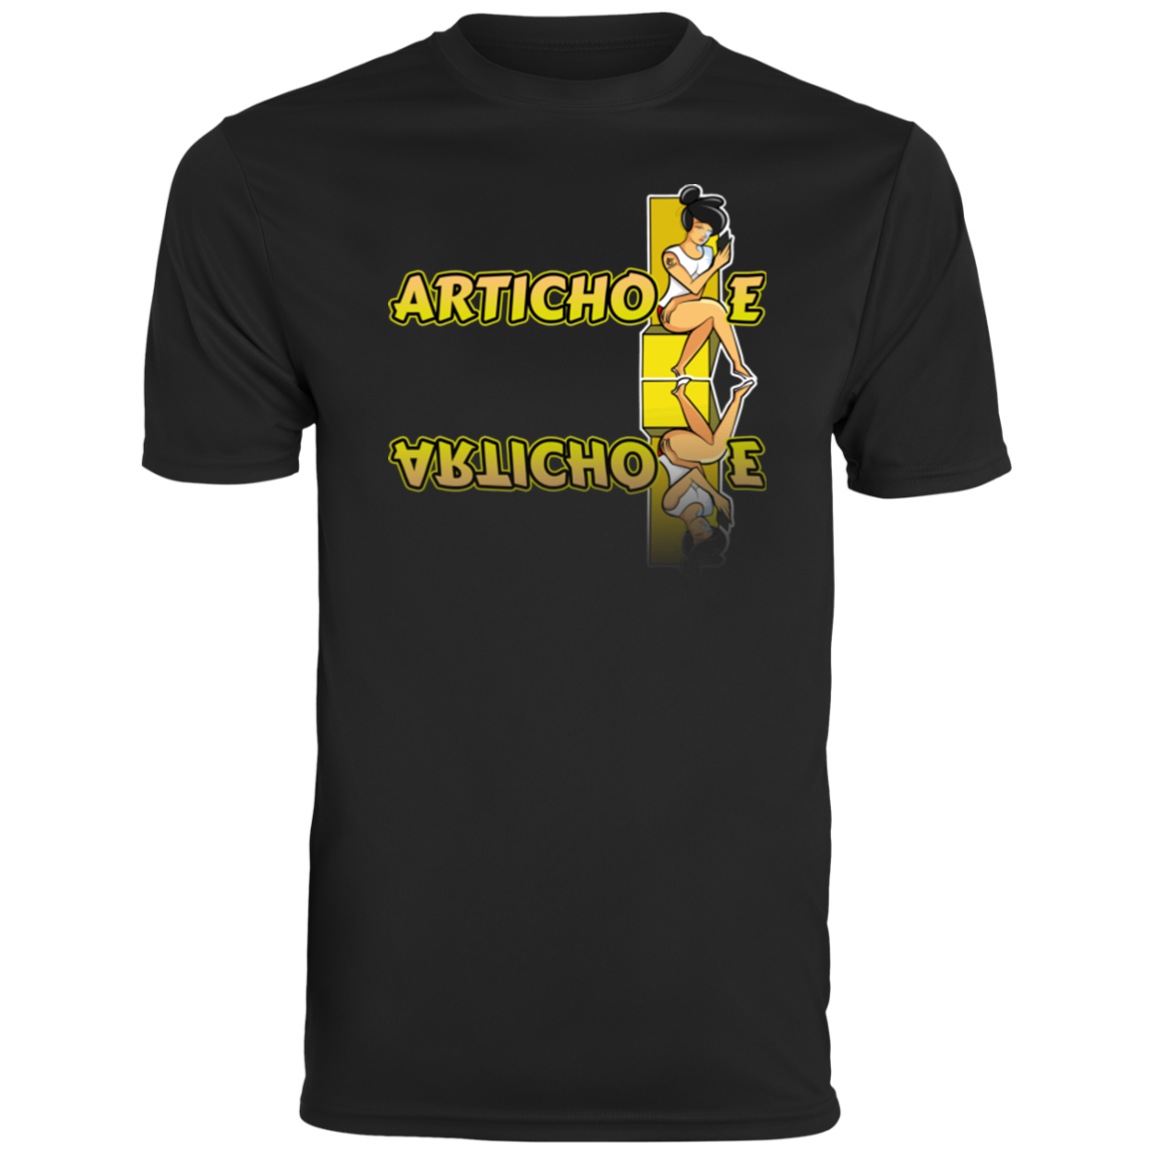 ArtichokeUSA Character and Font Design. Let’s Create Your Own Design Today. Betty. Men's Moisture-Wicking Tee